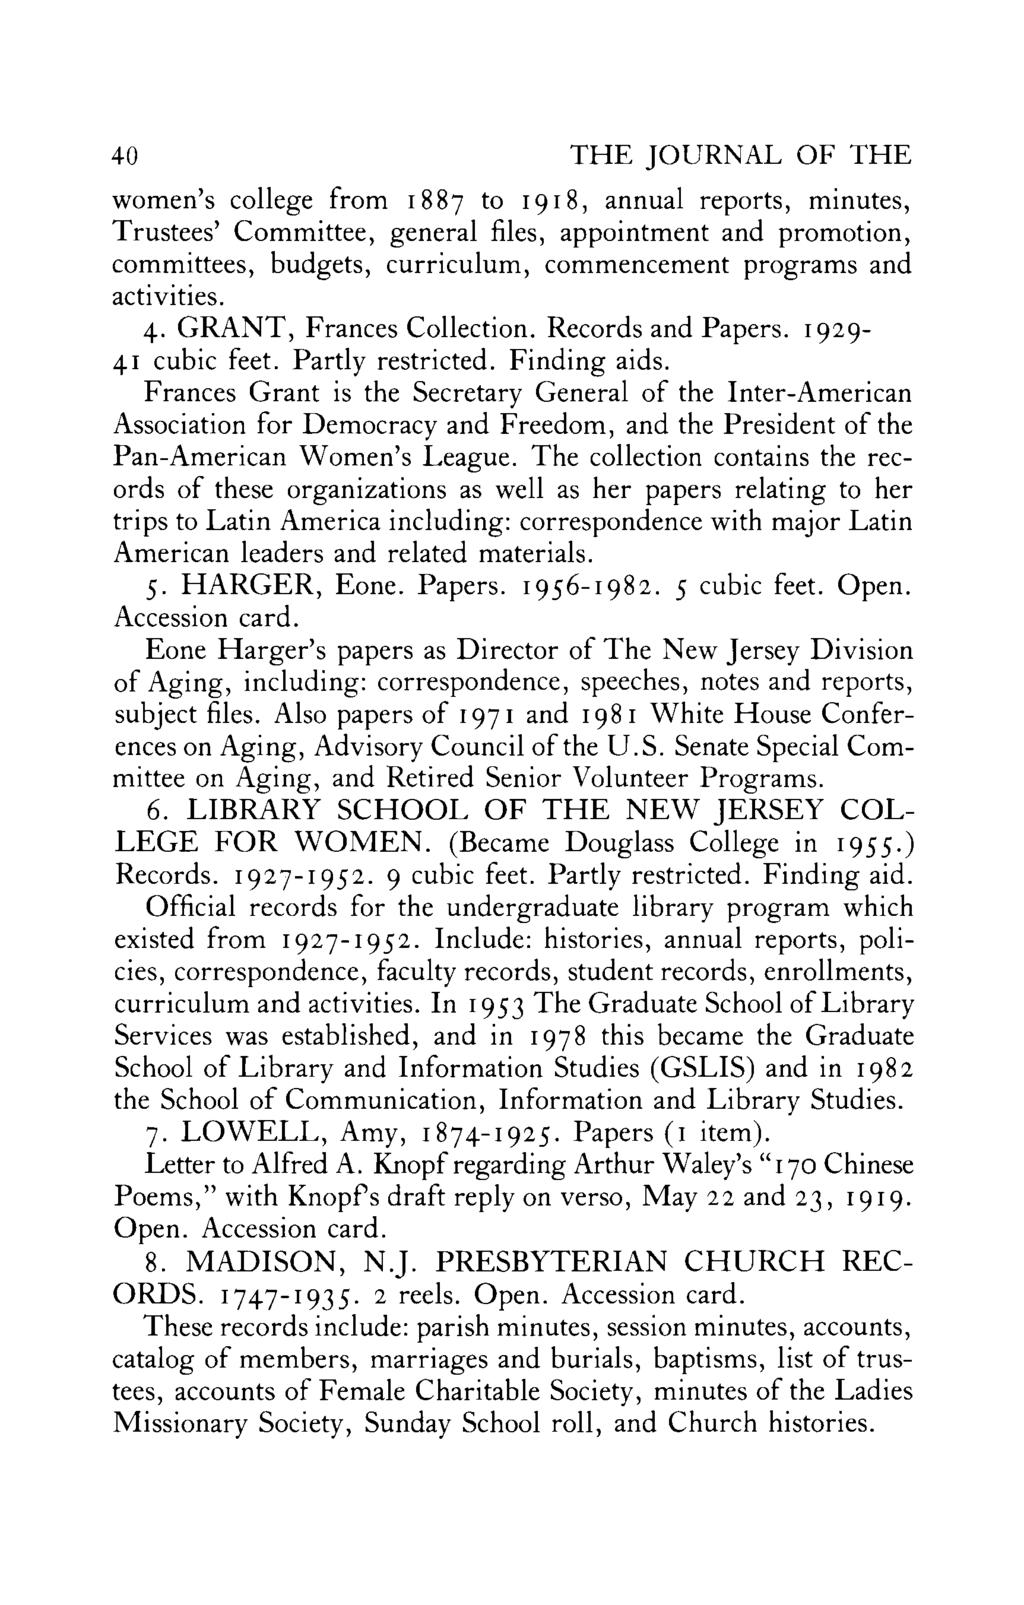 40 THE JOURNAL OF THE women's college from 1887 to 1918, annual reports, minutes, Trustees' Committee, general files, appointment and promotion, committees, budgets, curriculum, commencement programs